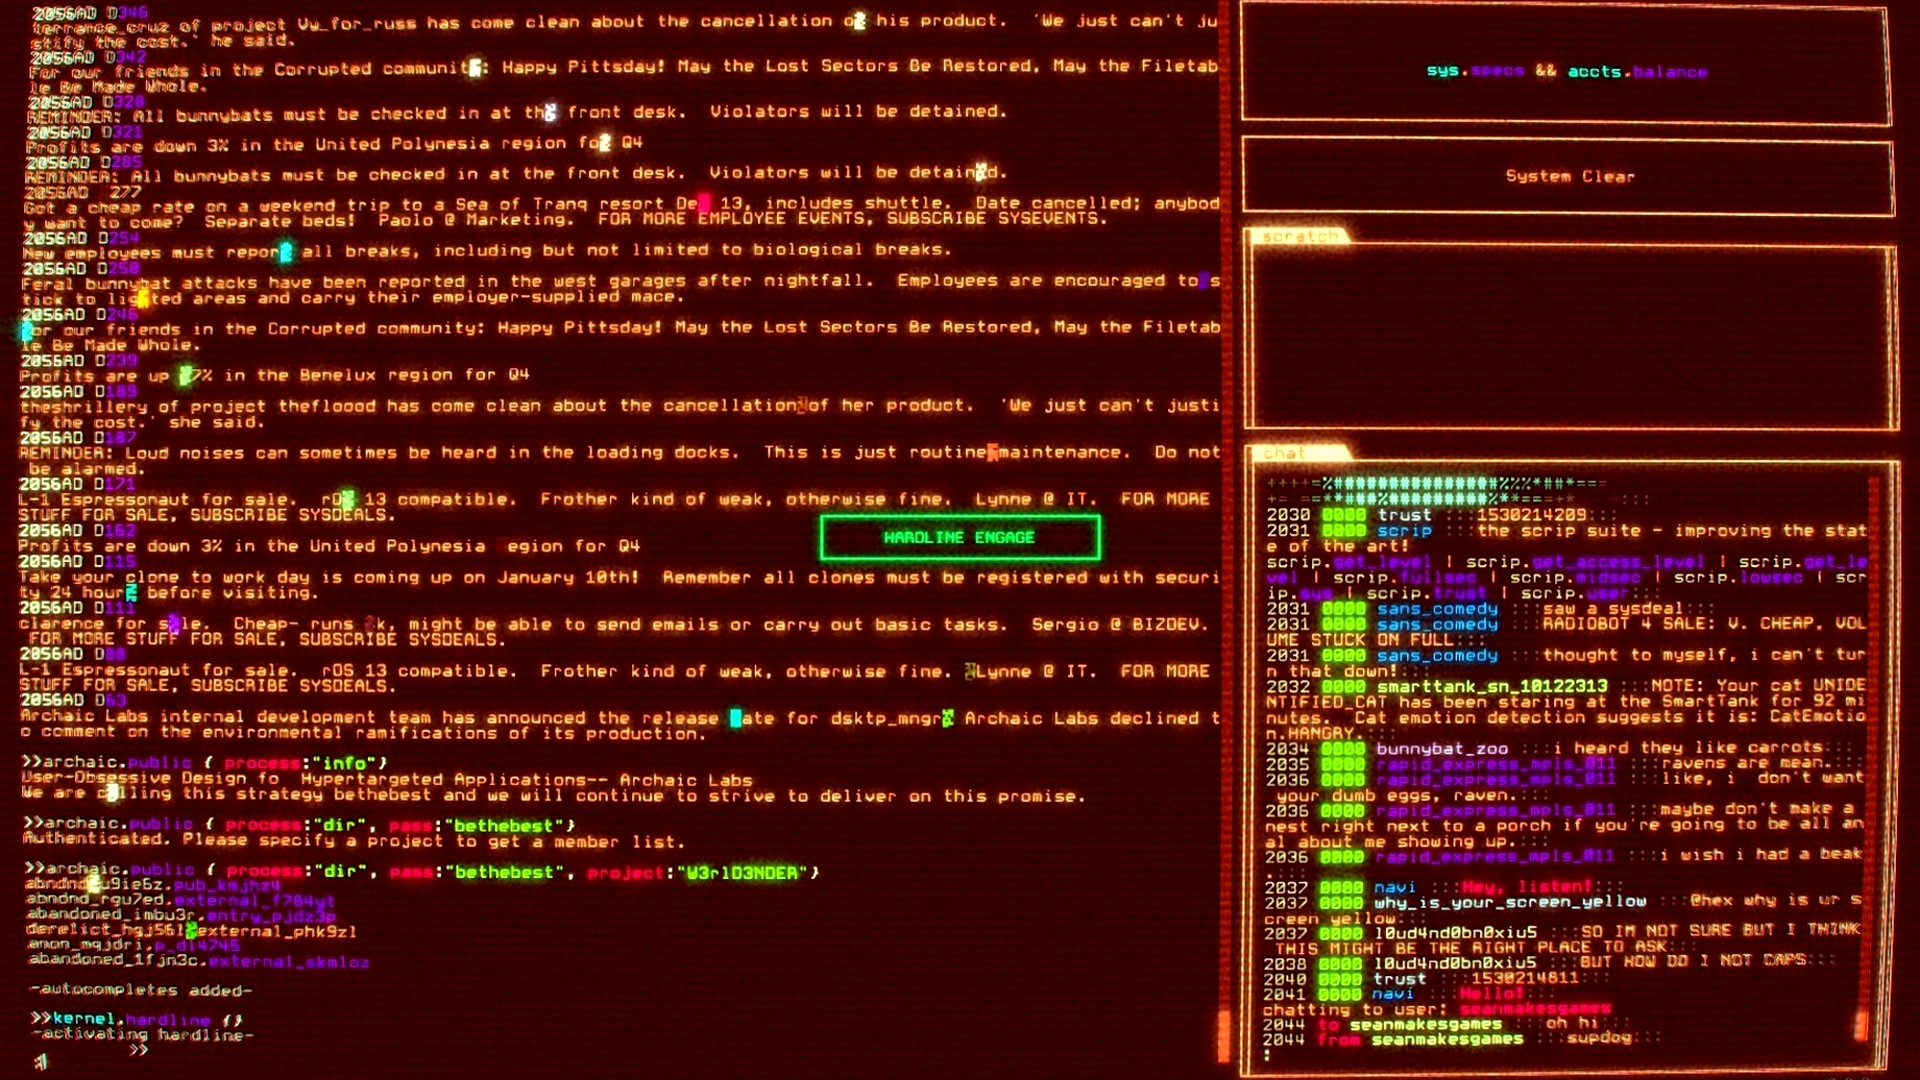 How to Make a Good Hacking Game When the Reality Is Massively Dull